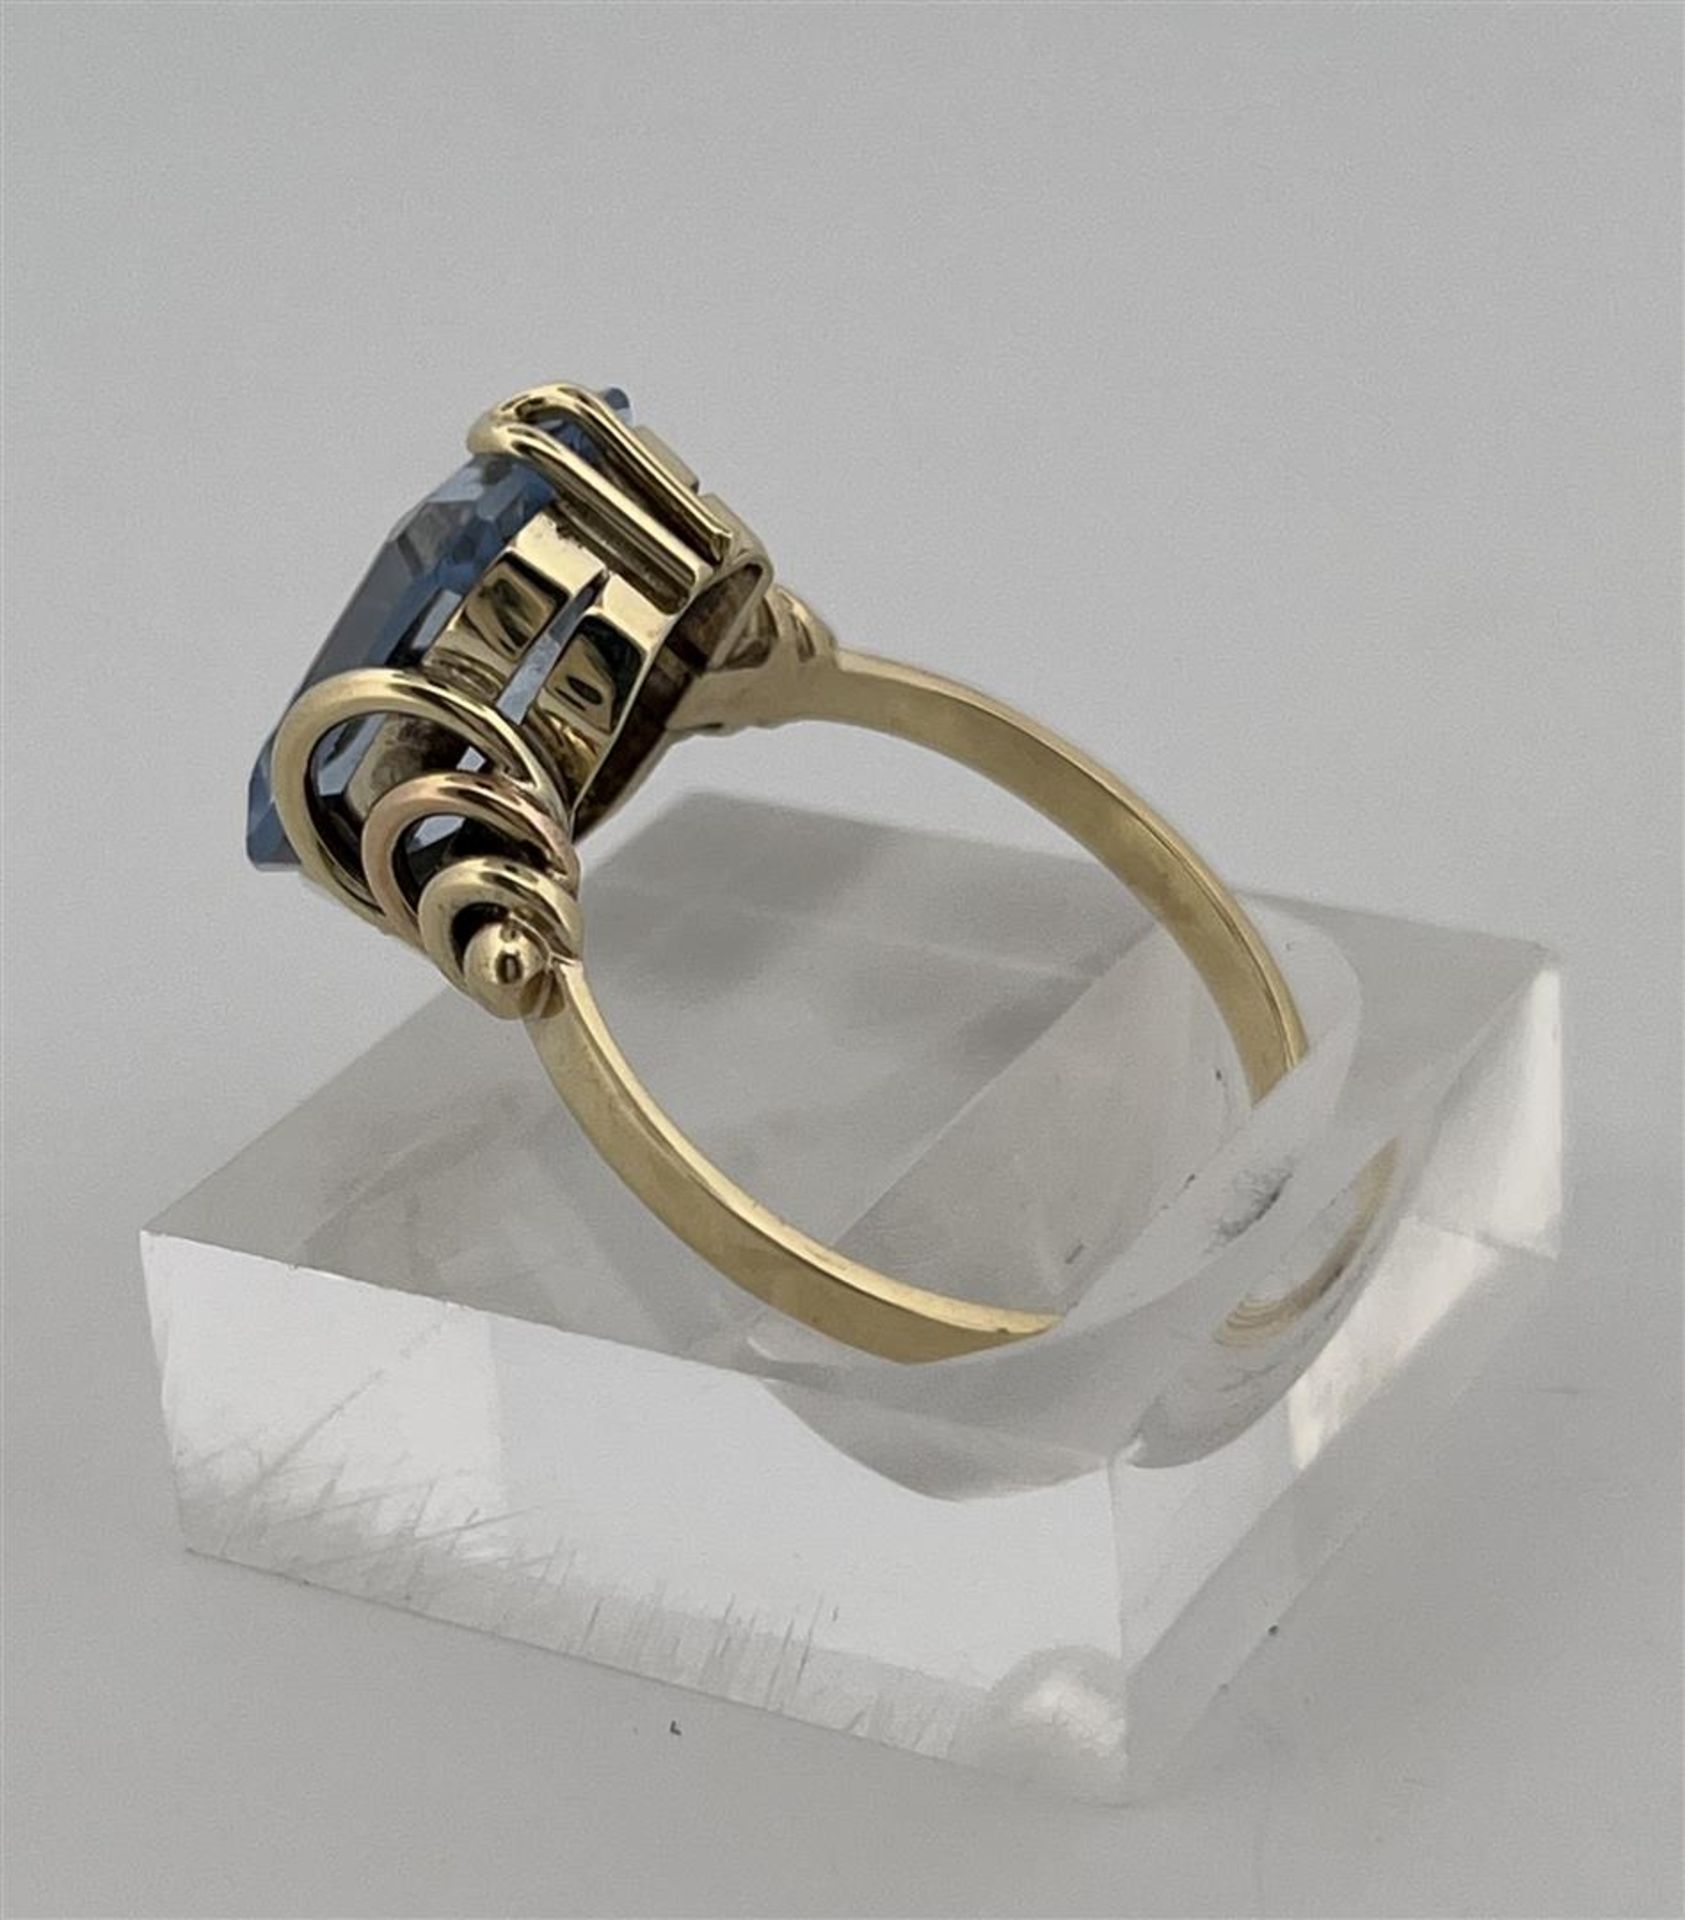 14kt yellow gold ring set with aquamarine.
The aquamarine isemerald cut measures approx. 11.8 x 8.9  - Image 9 of 11